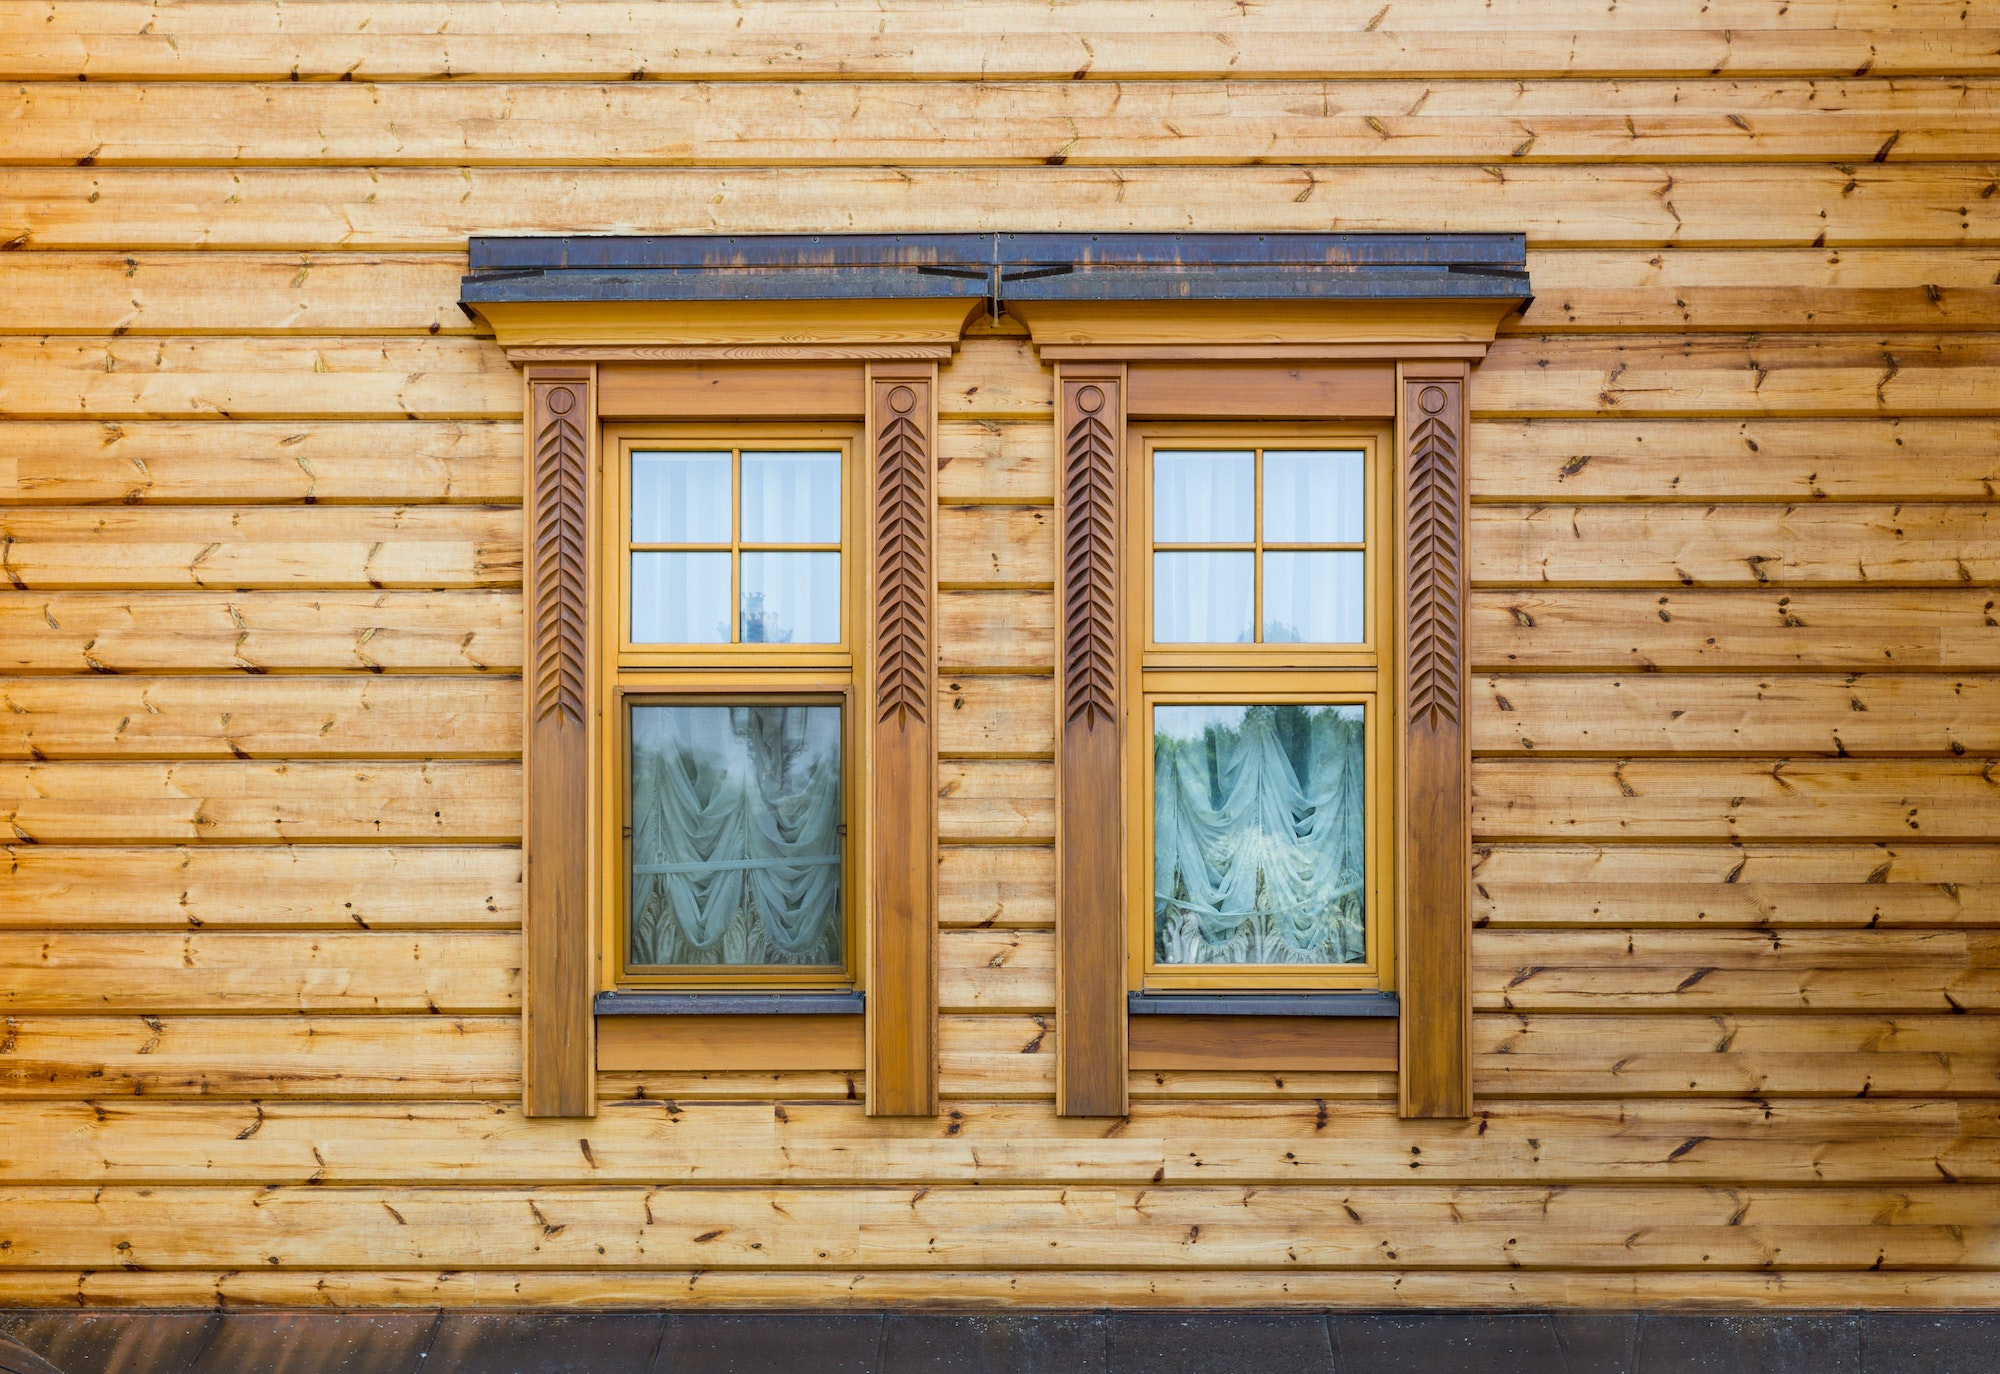 Windows of the wooden house